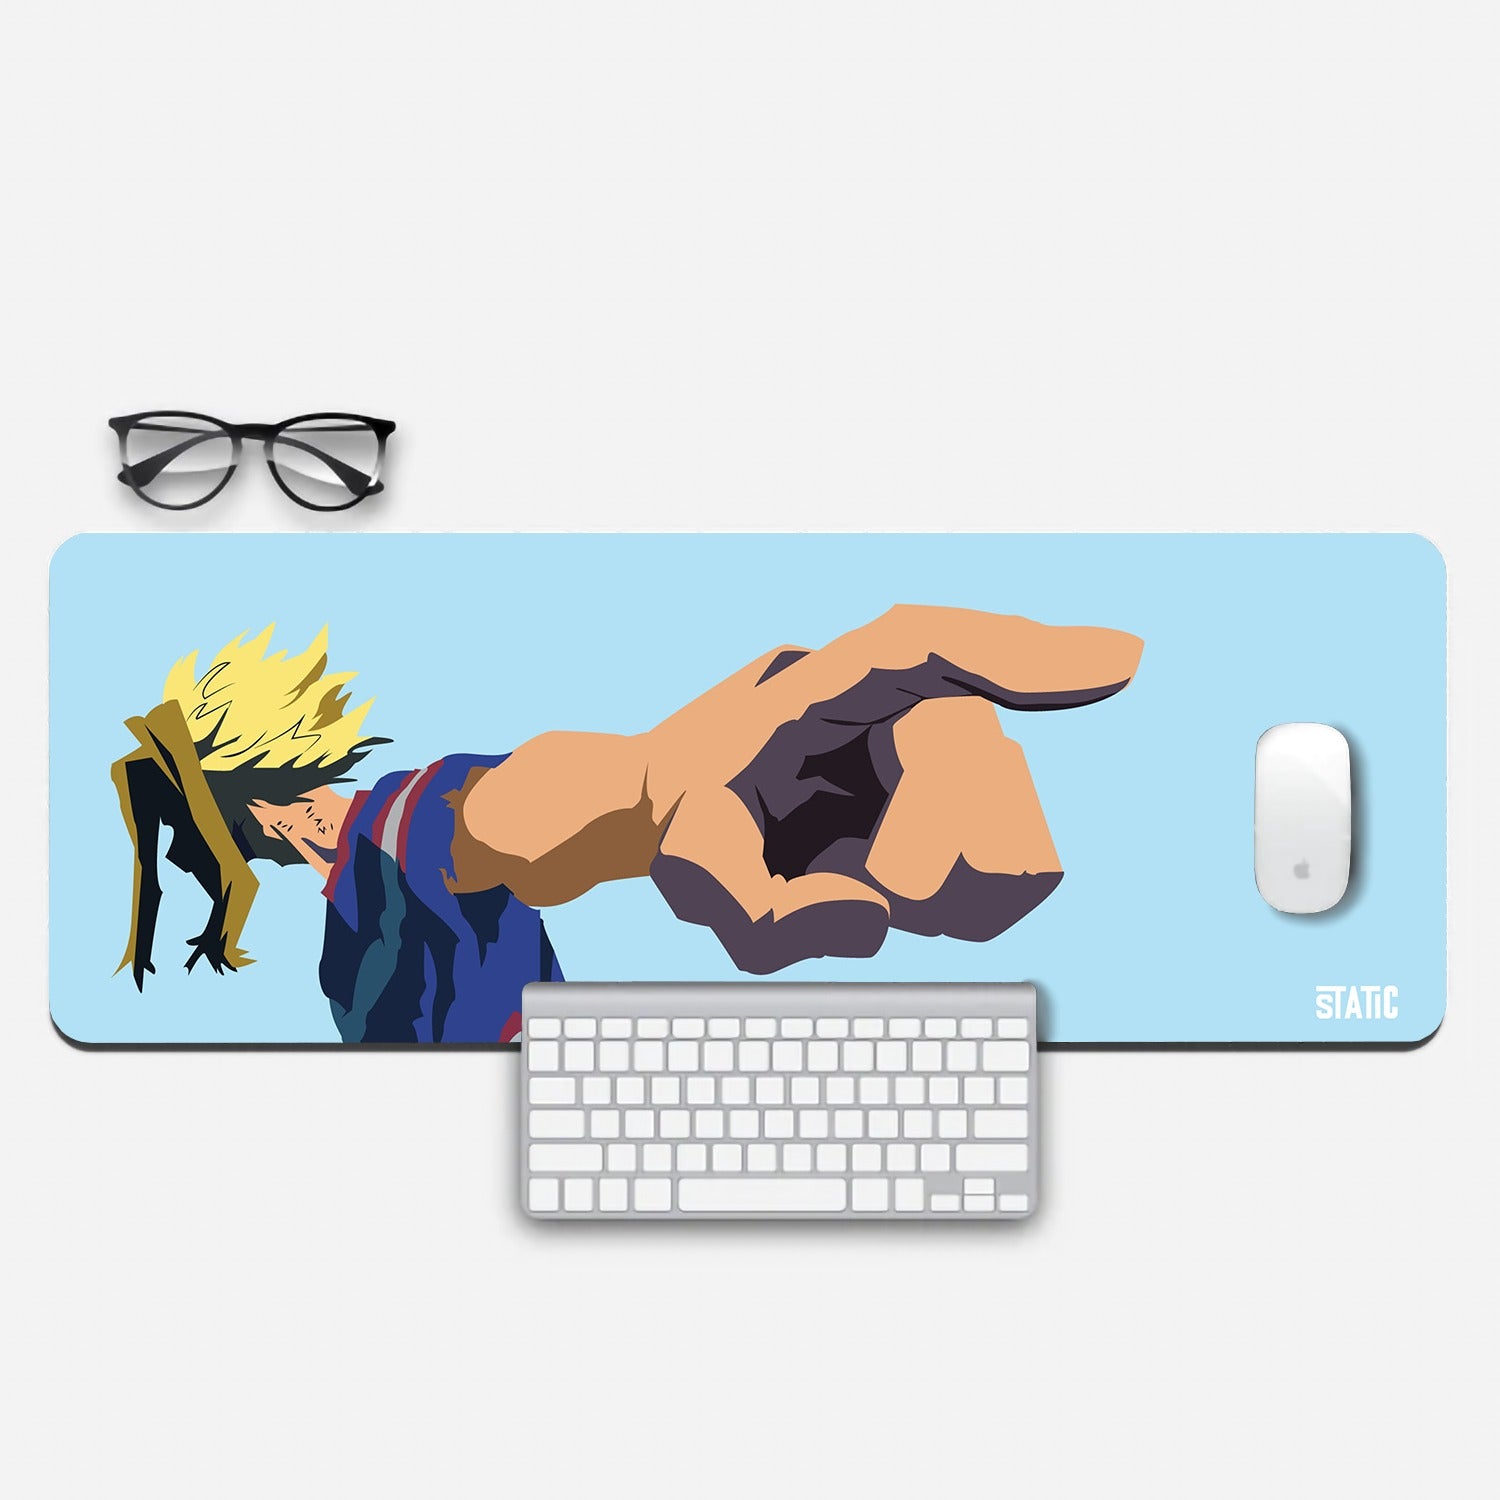 Elevate your gaming experience with our extended gaming mouse pad, featuring the iconic All Might from My Hero Academia. In this impressive image, All Might points directly at you, capturing the essence of his famous 'You're next' declaration. This mouse pad not only offers a generous surface for precise mouse control but also immerses you in the heroic world of My Hero Academia. Get ready to unleash your gaming potential with the symbol of peace by your side. Elevate your game today!